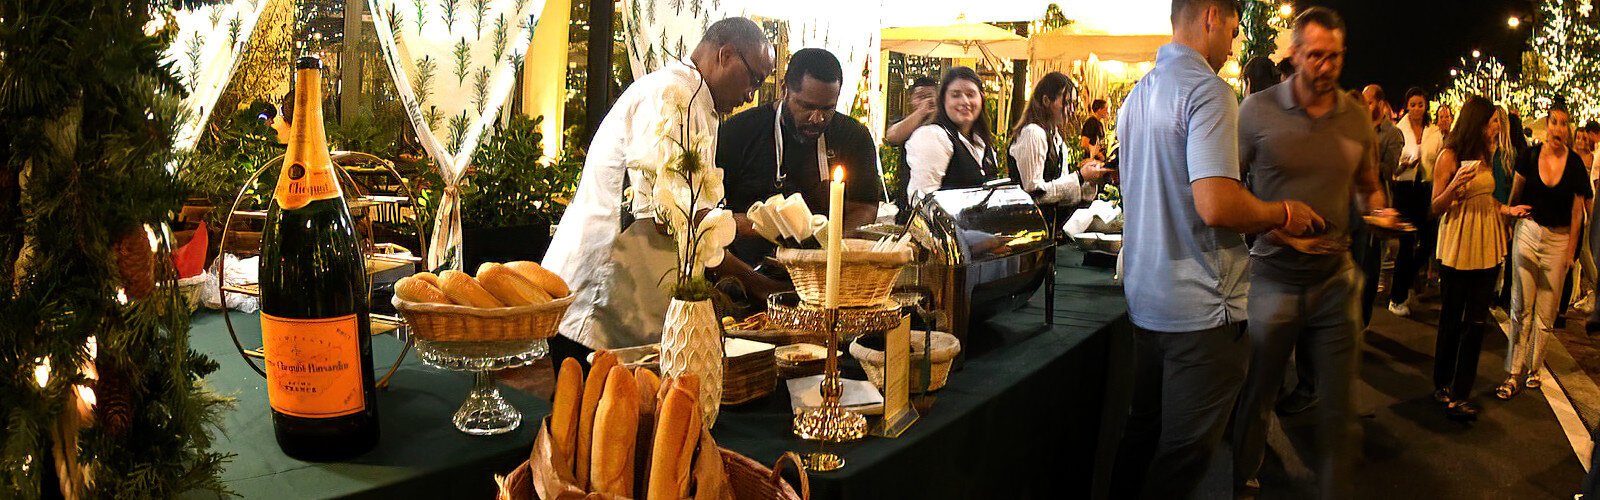 Visitors enjoy French festive food available for purchase at the Boulon Brasserie stand on Water Street during the Season Spectacular celebration.